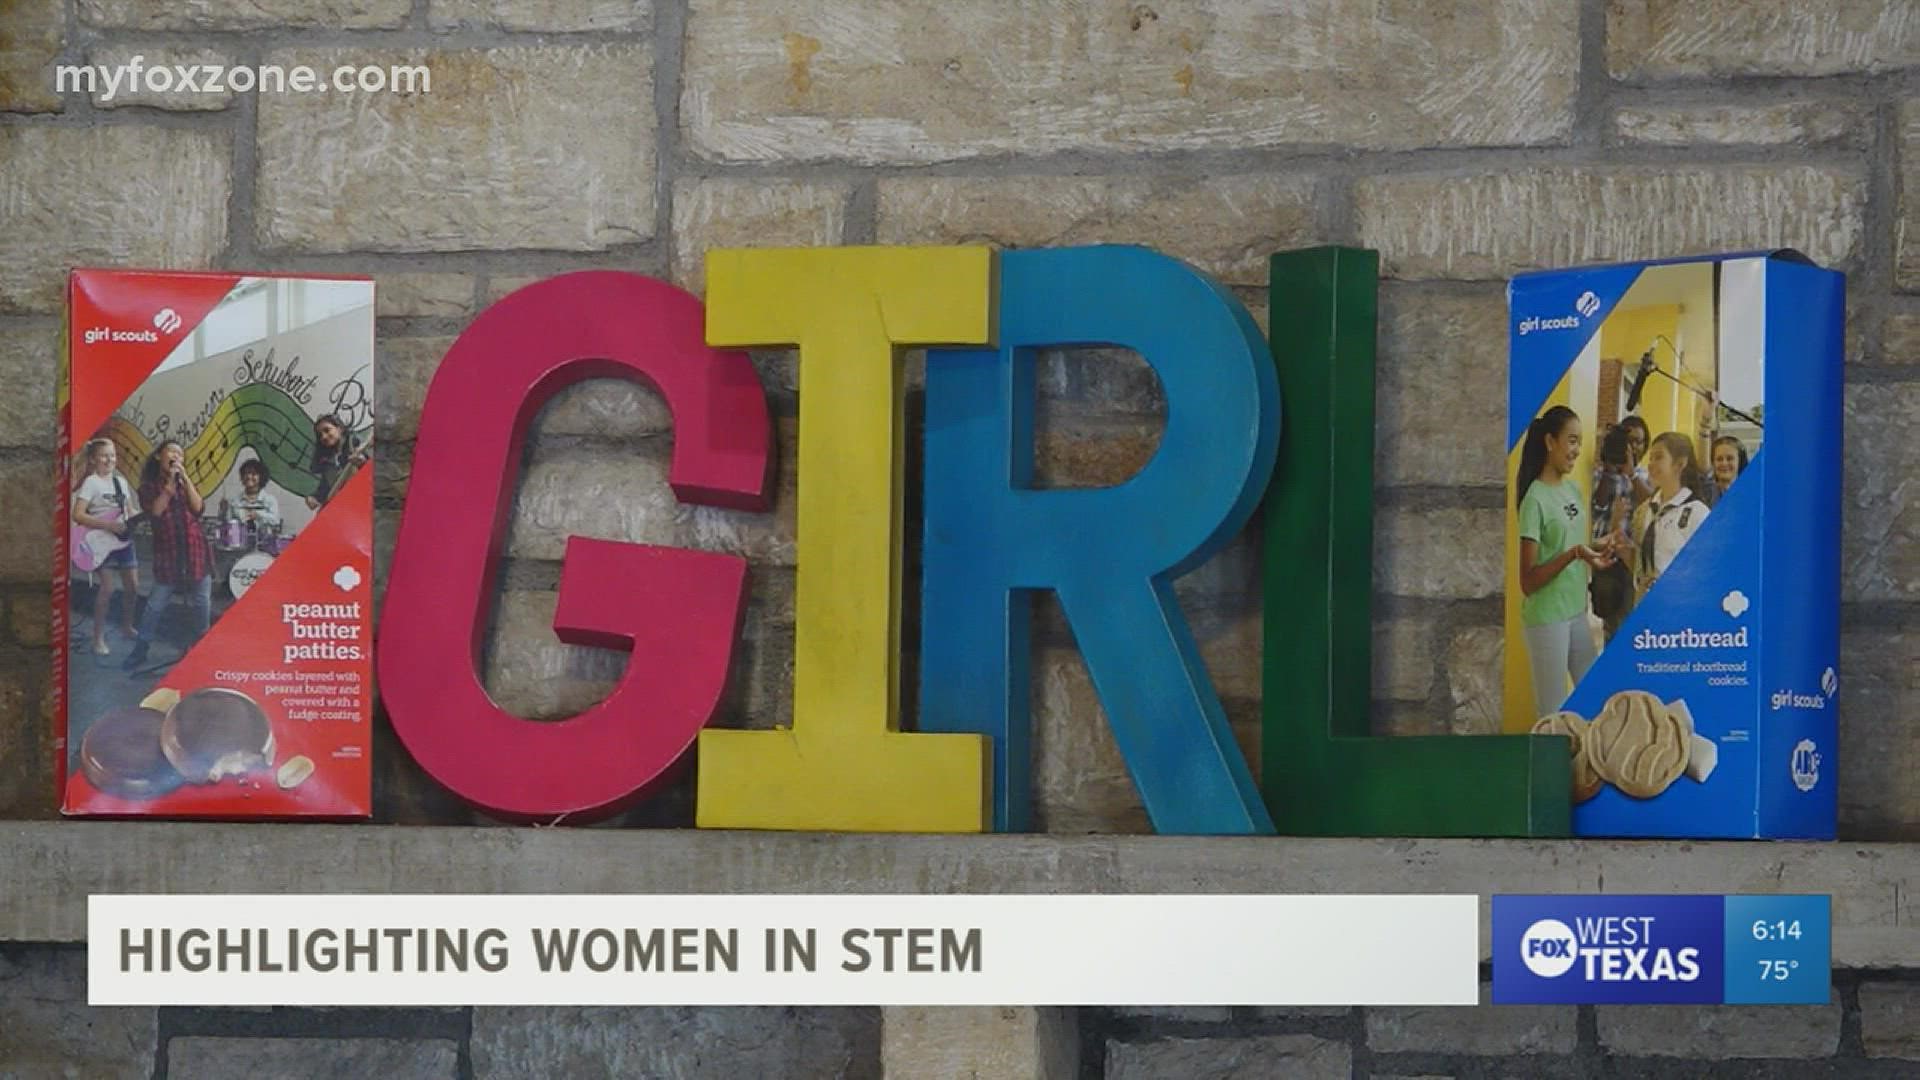 In honor of Women's History Month, here are highlights on a few women who are making an impact in the STEM field in West Texas.